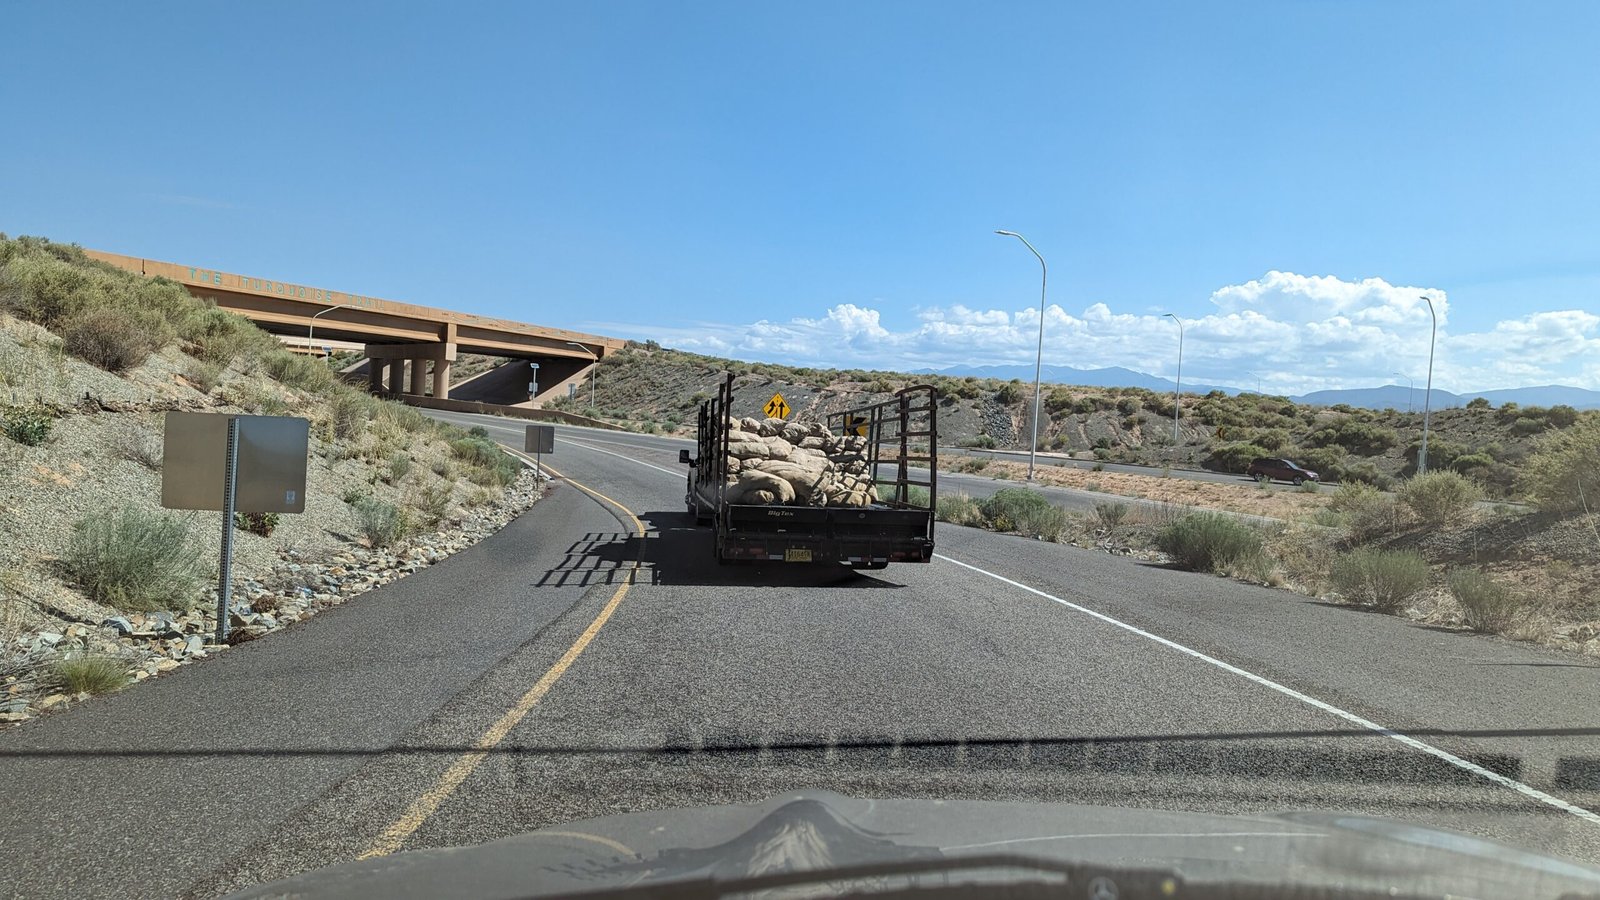 A hatch chile truck on an offramp of I-25 in New Mexico